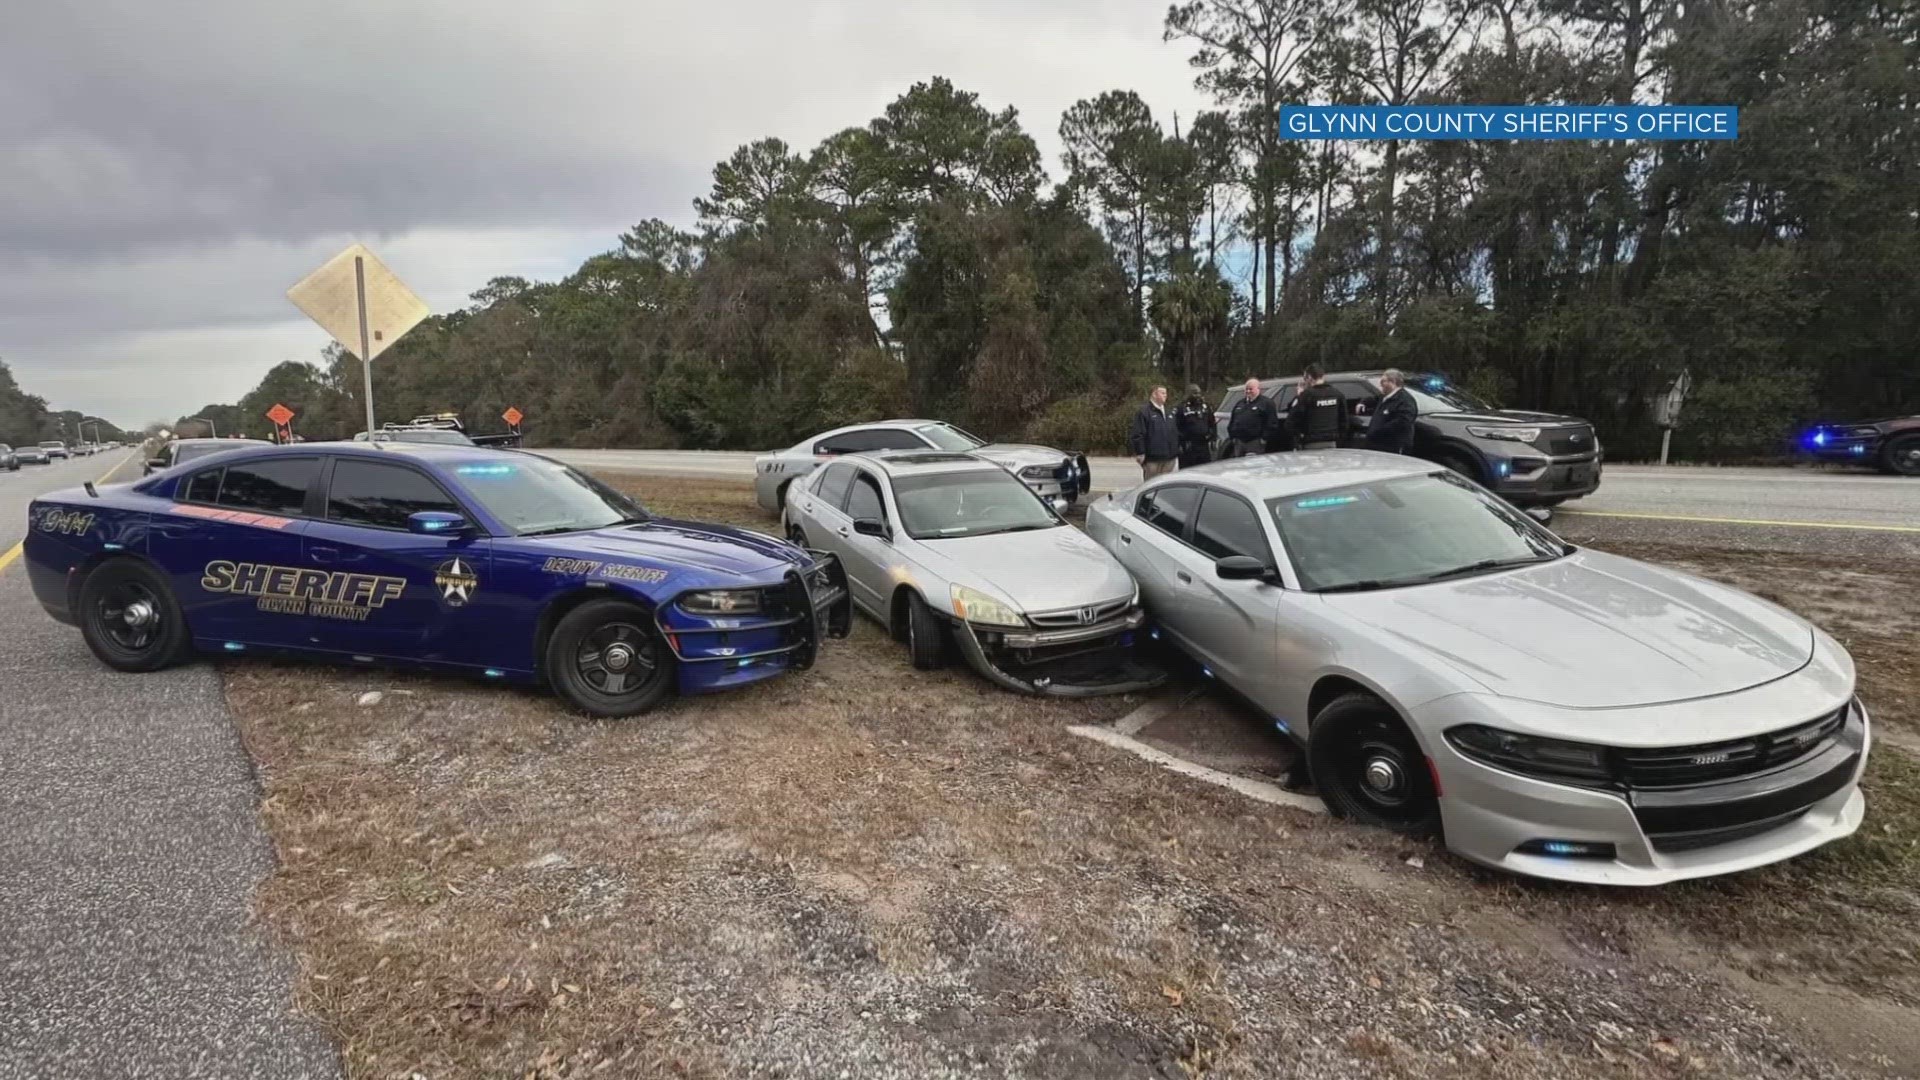 The Glynn County Sheriff's Office says deputies engaged in a 'PIT maneuver' to stop the driver's car before a foot chase ensued.